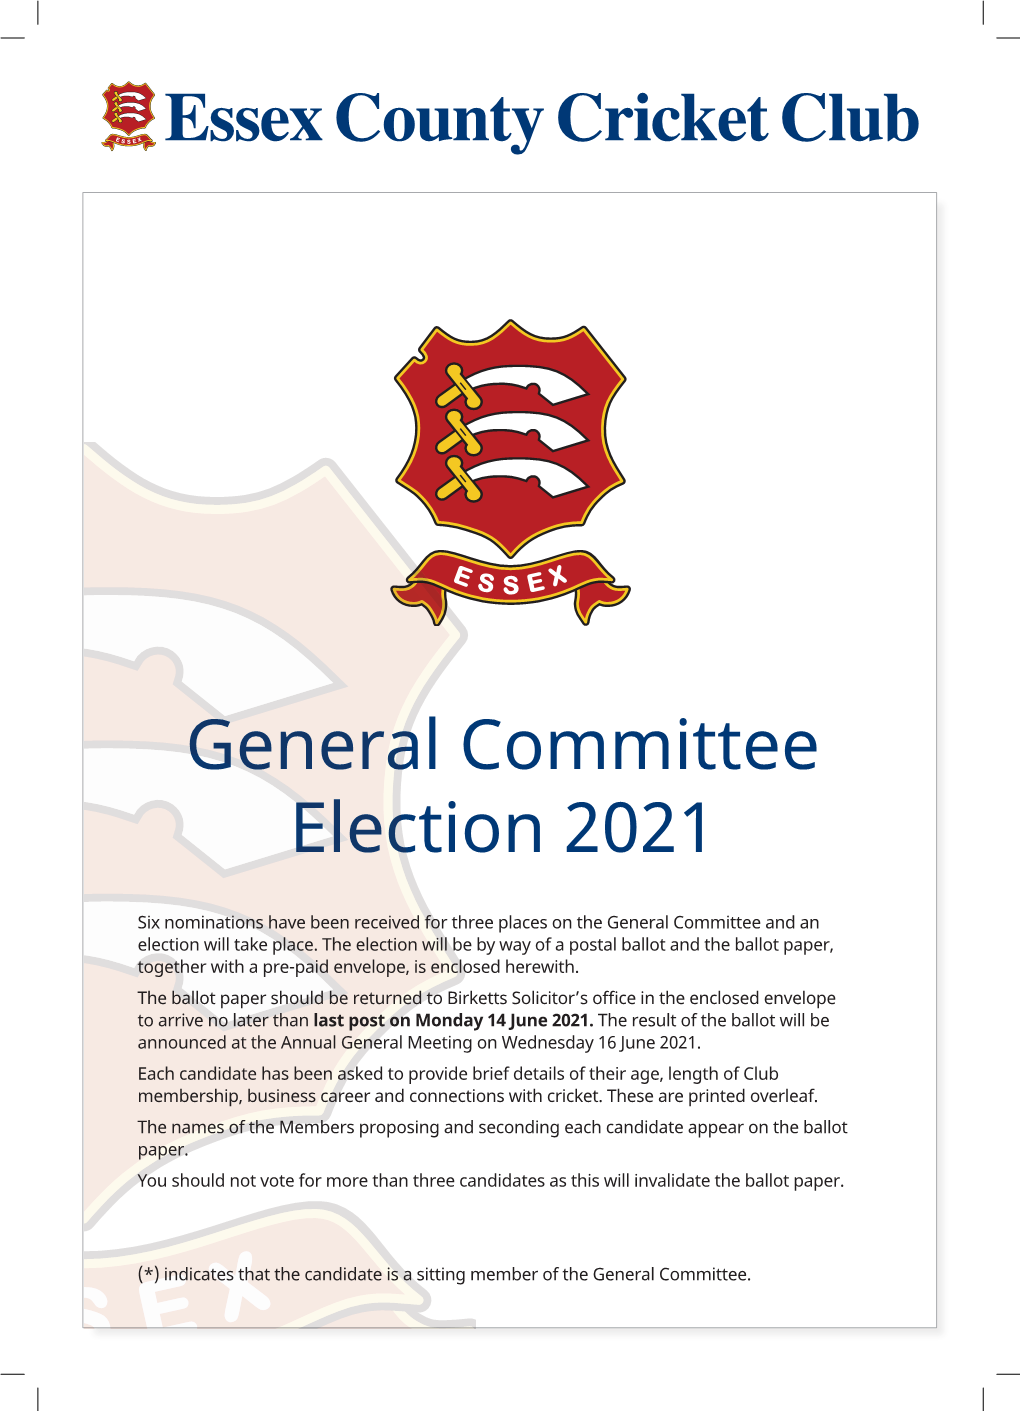 General Committee Election 2021